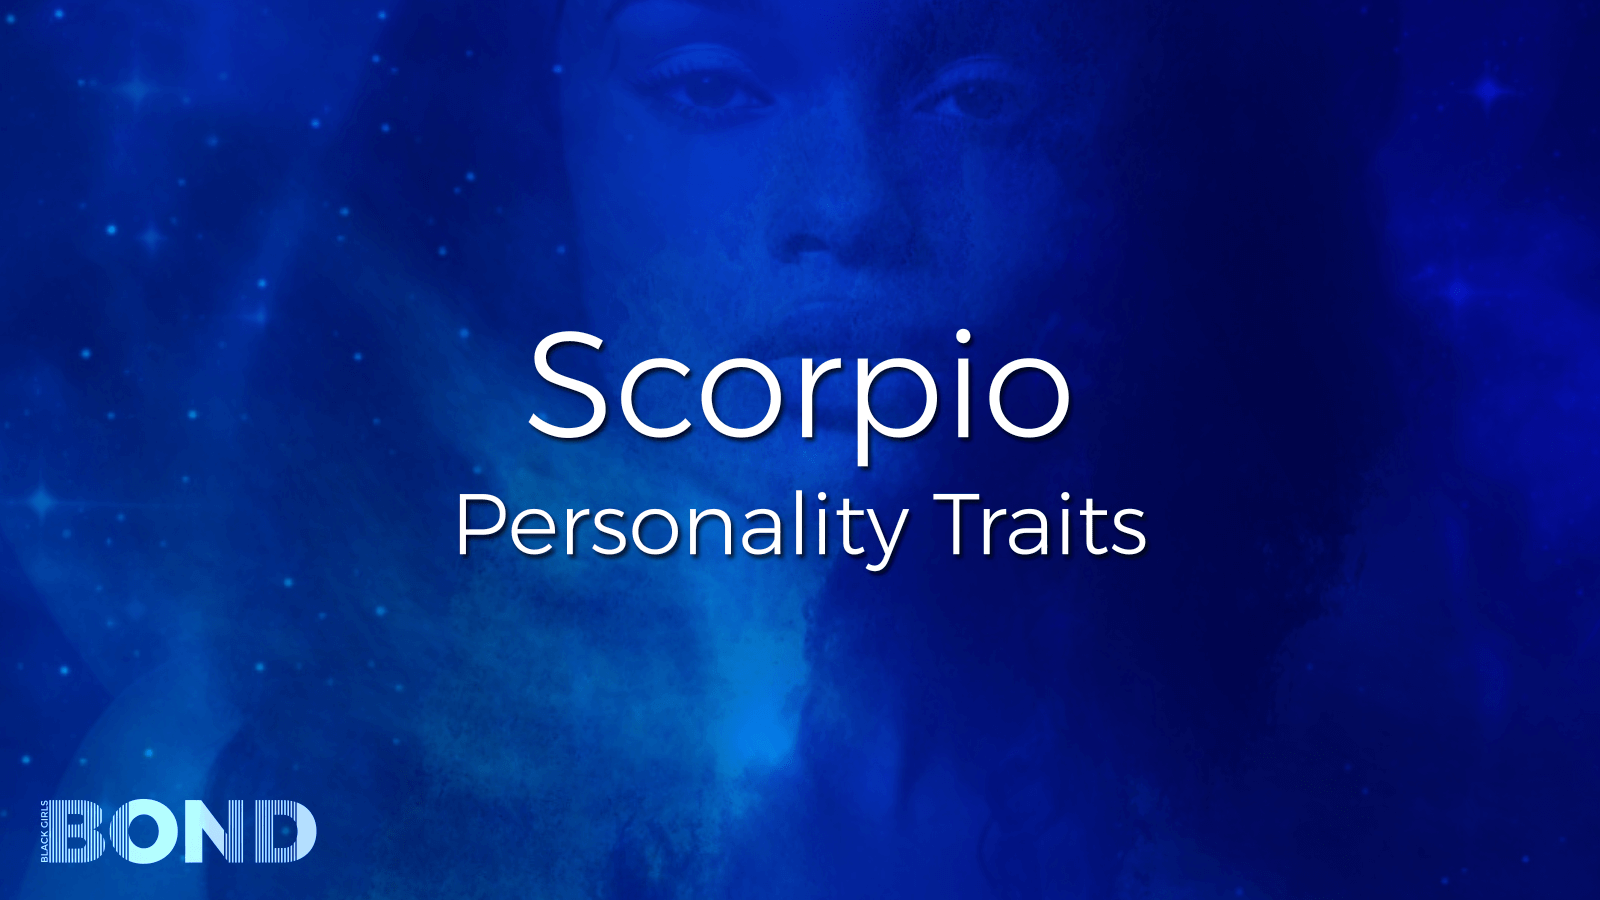 Scorpio Zodiac Sign: Personality Traits, Compatibility, Love, Relationships and More